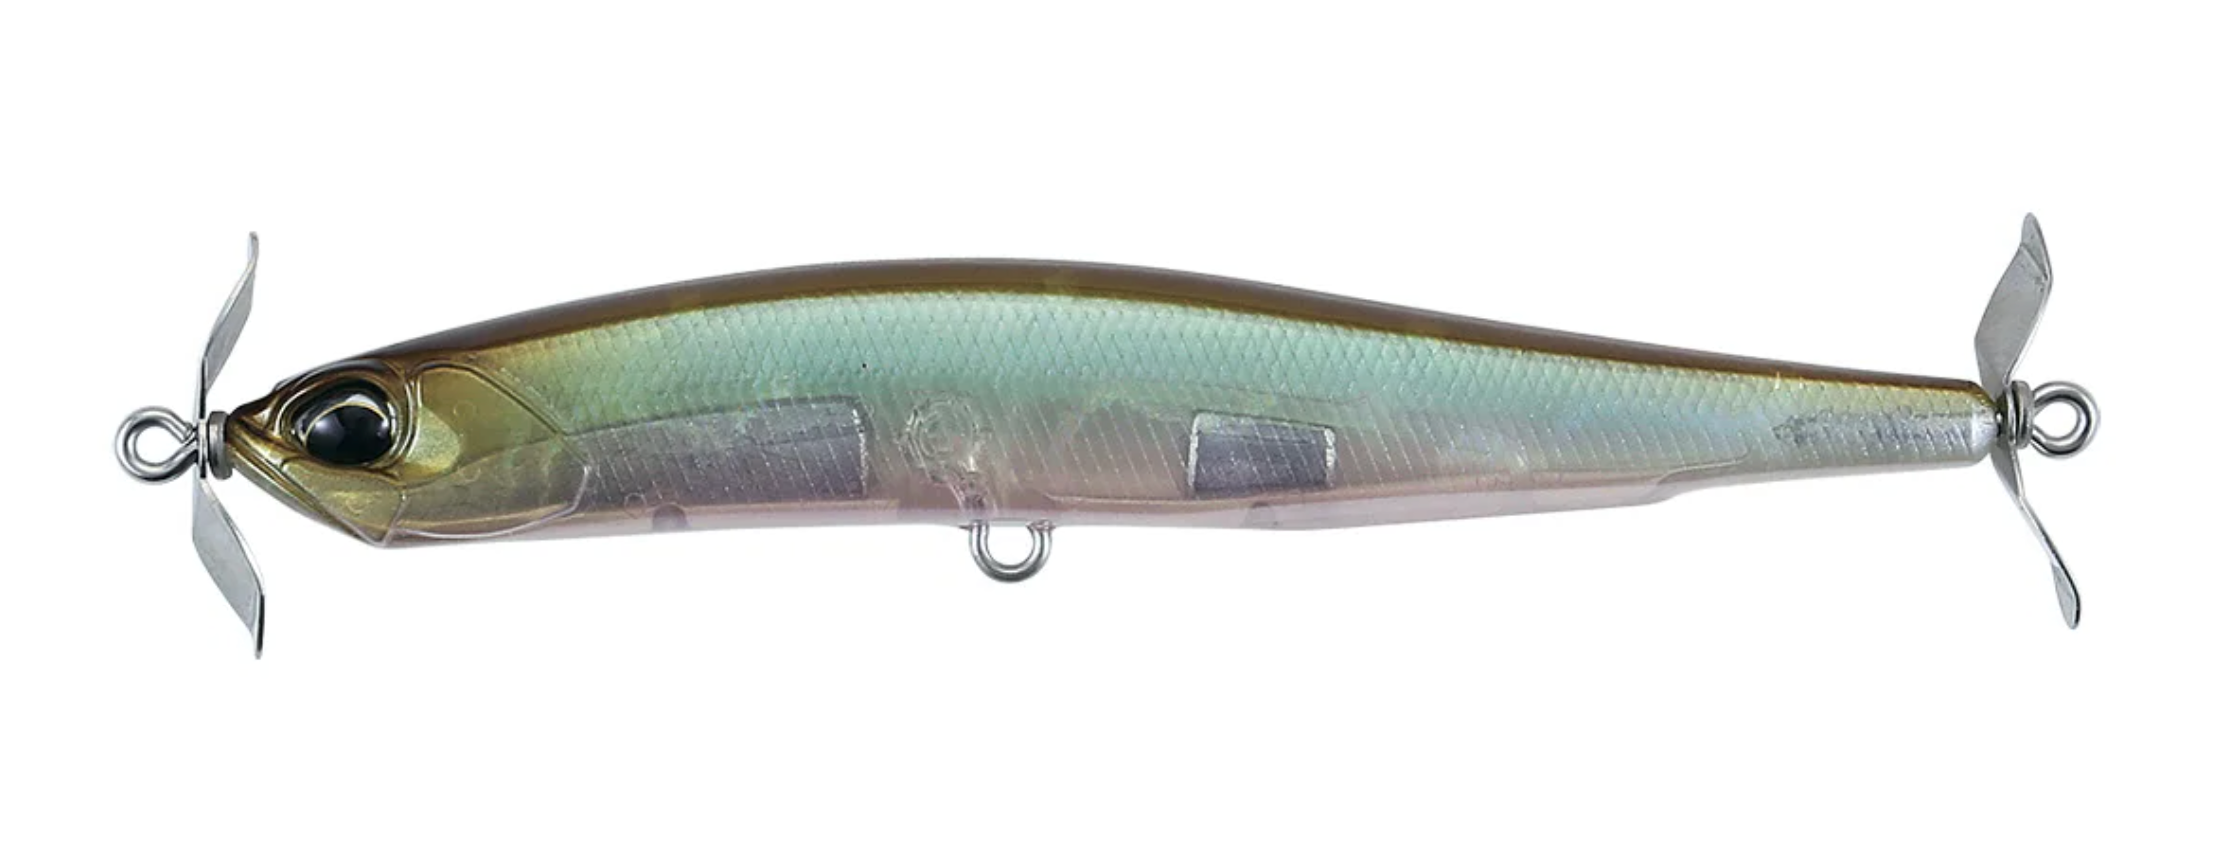 Duo Realis Spinbait 80 GHOST MINNOW